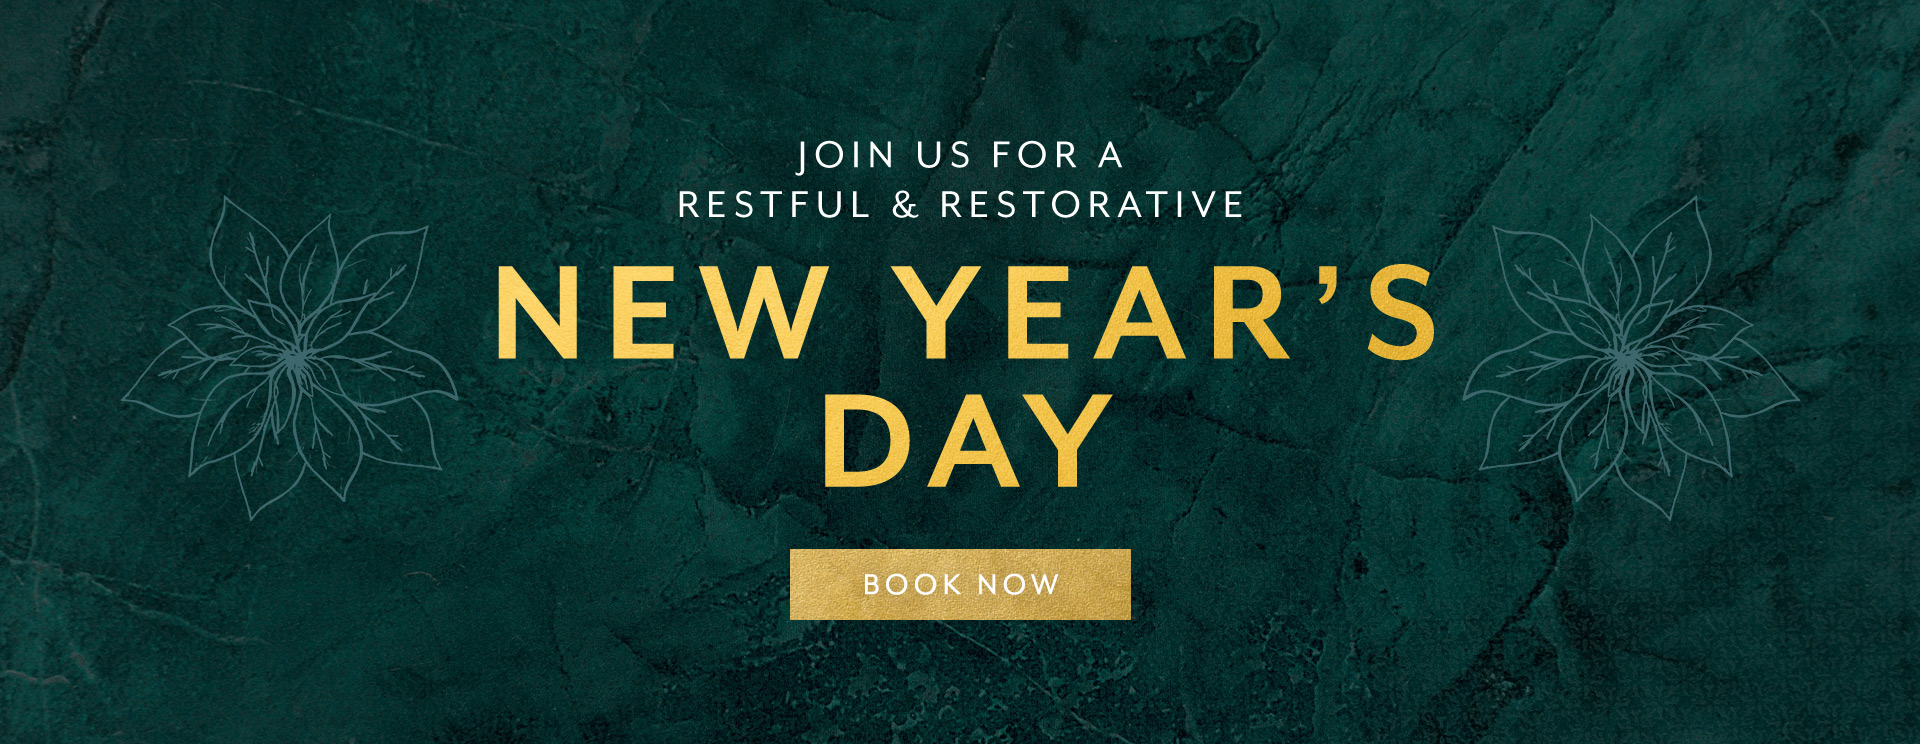 New Year's Day at The Rose & Crown